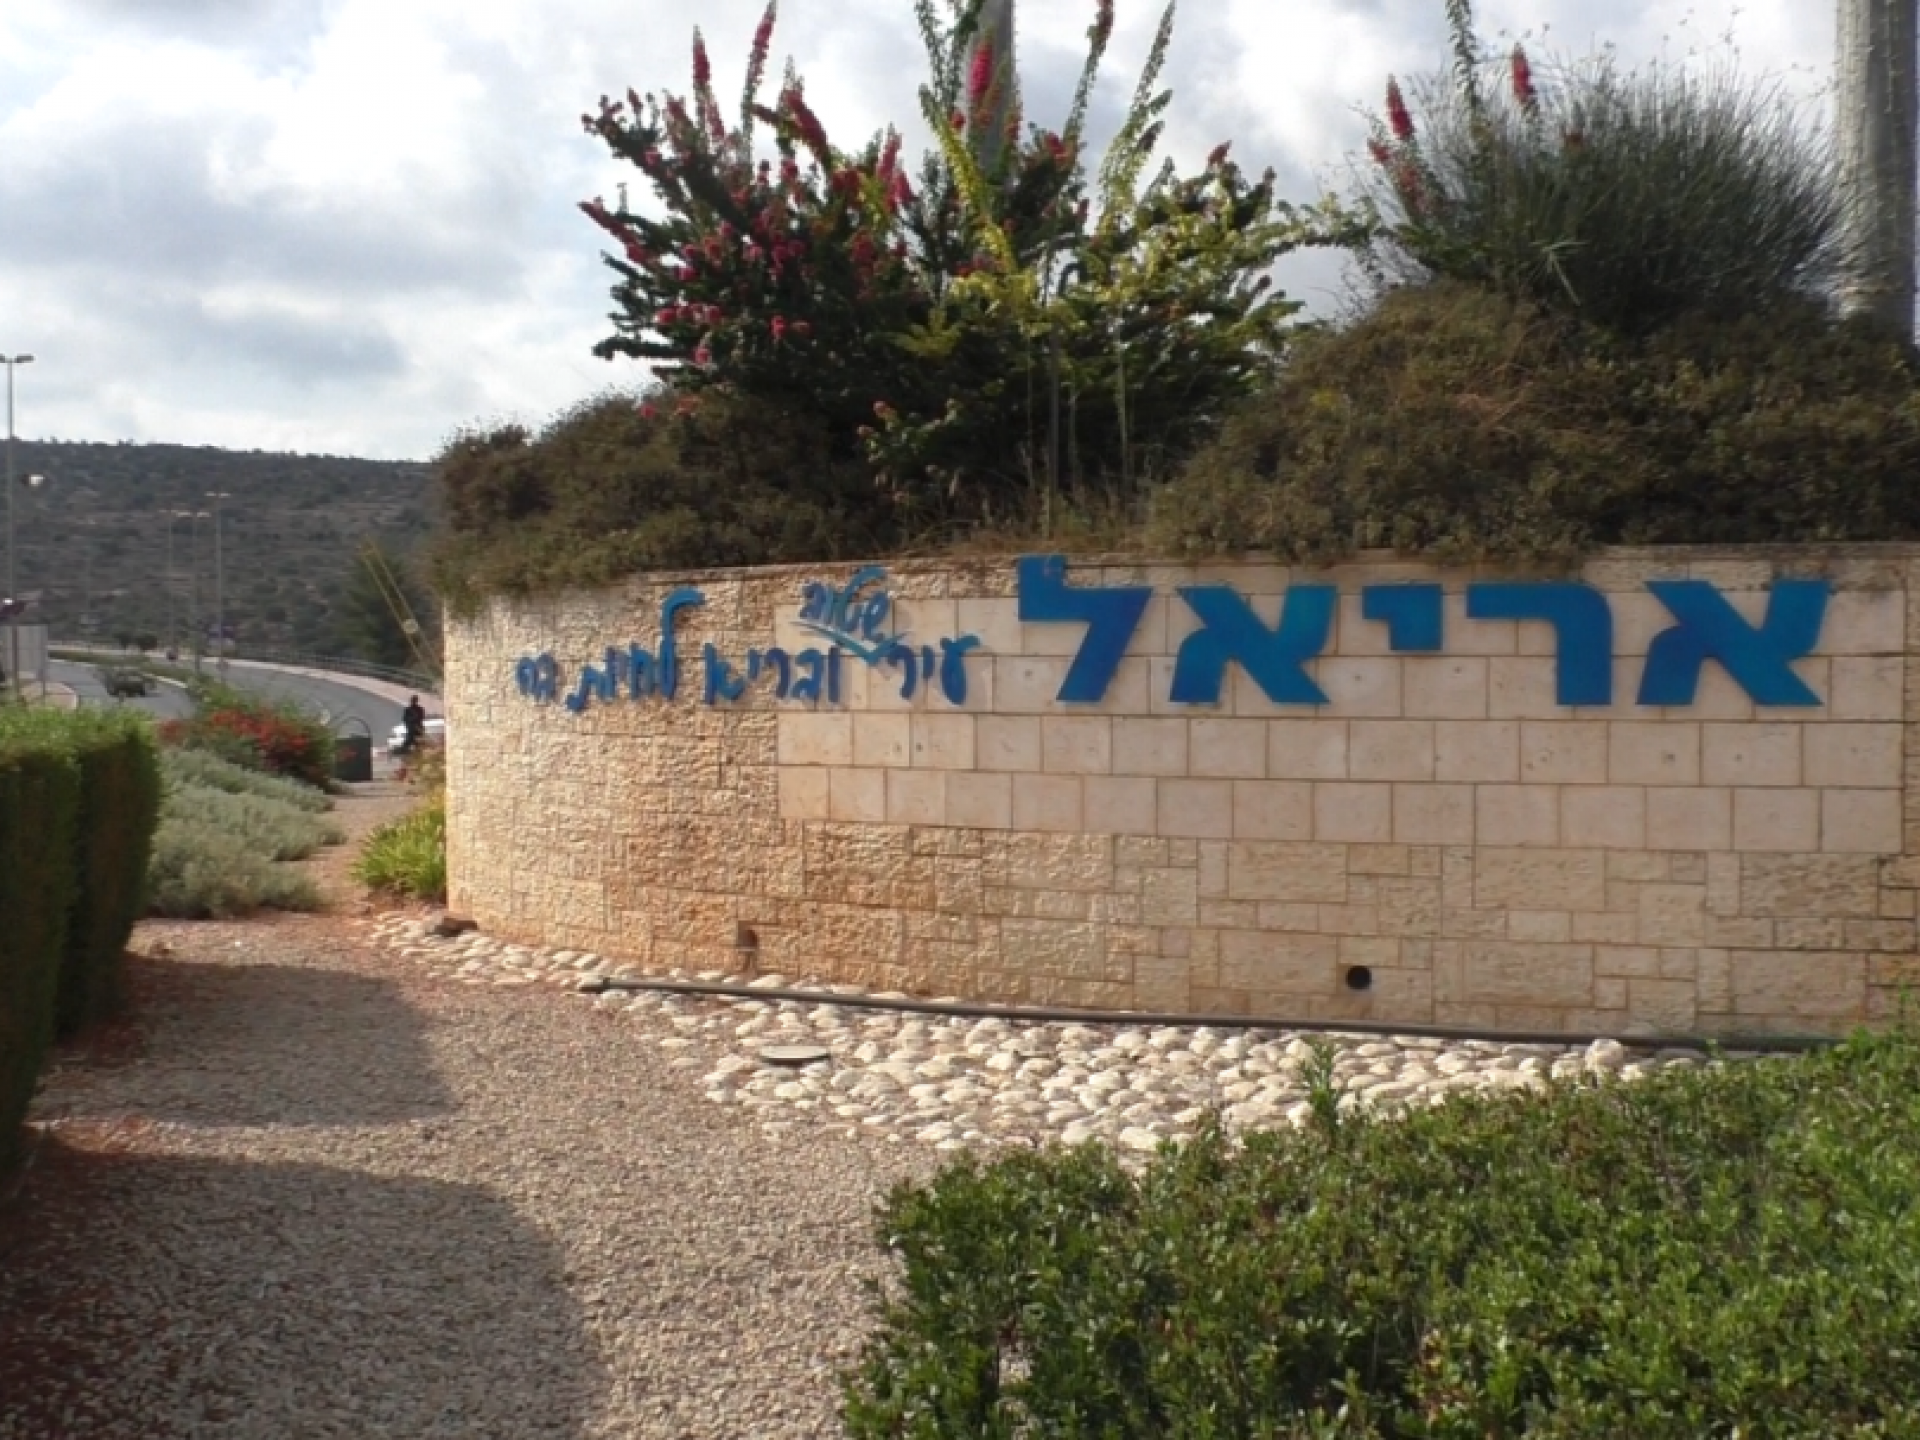 Signage at the entrance to the Ariel settlement – “A town where life is healthy and good”